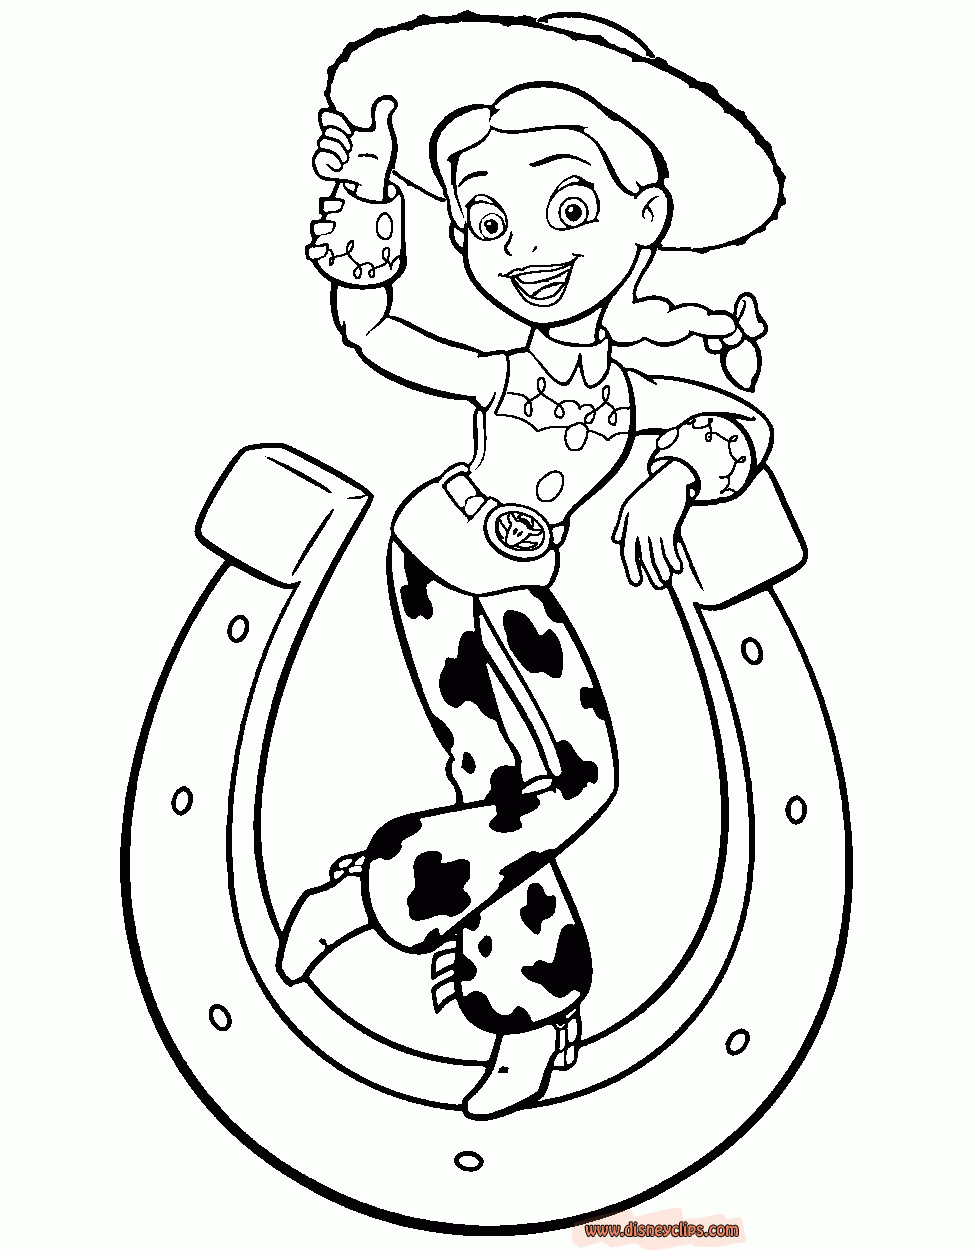 Coloring Ideas : Coloring Ideas Outstanding Easy Princess Pages Page - Free Printable Coloring Pages Of Disney Characters